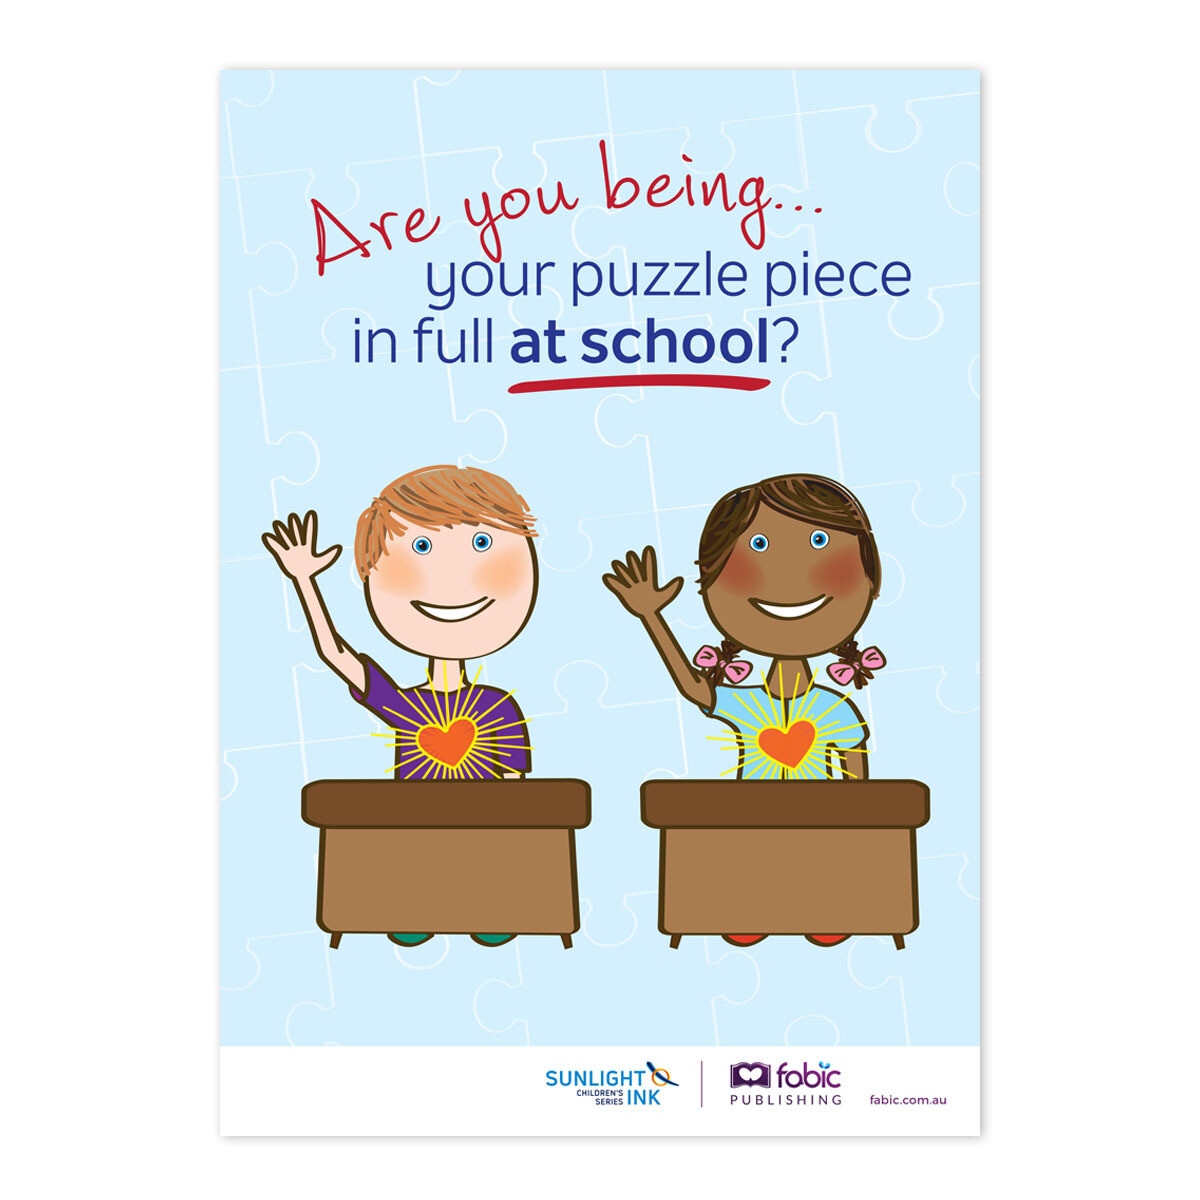 Are you being your puzzle piece at school? (Poster)